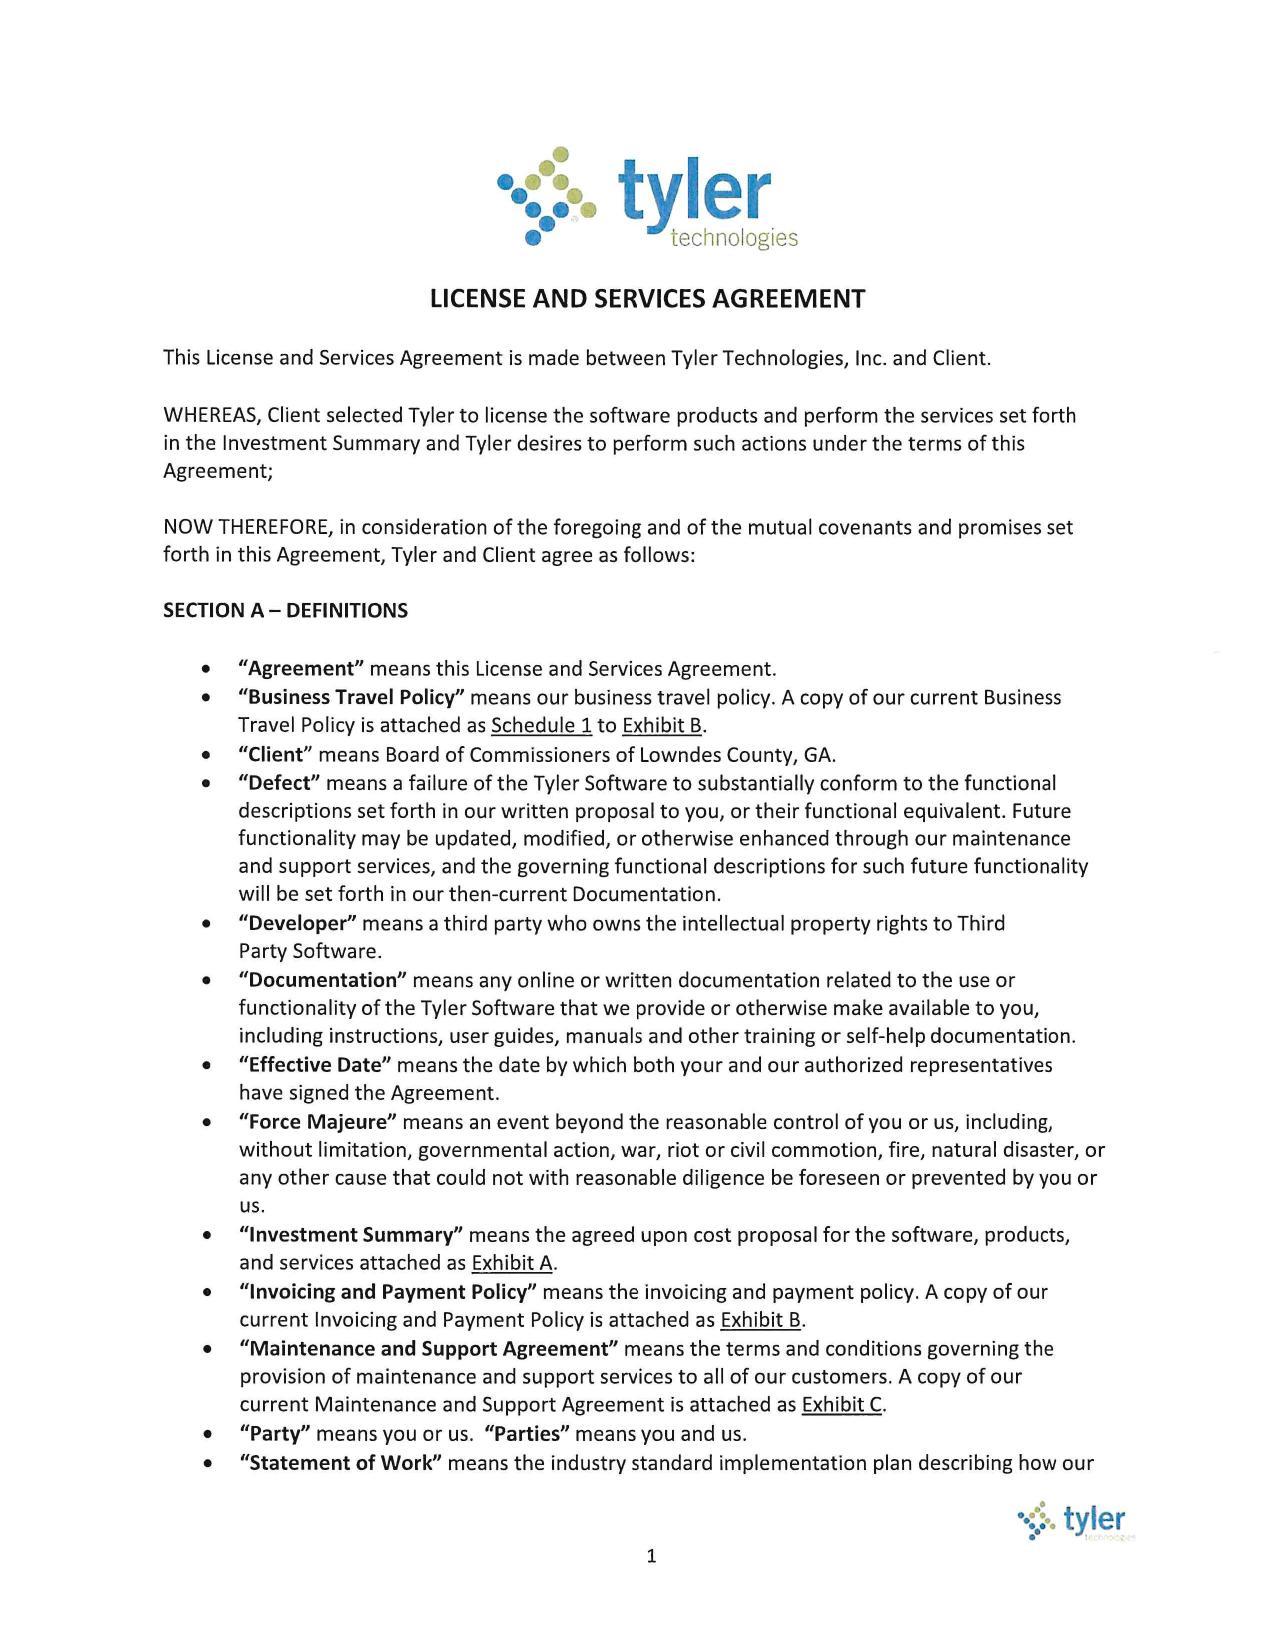 LICENSE AND SERVICES AGREEMENT --Tyler Technologies